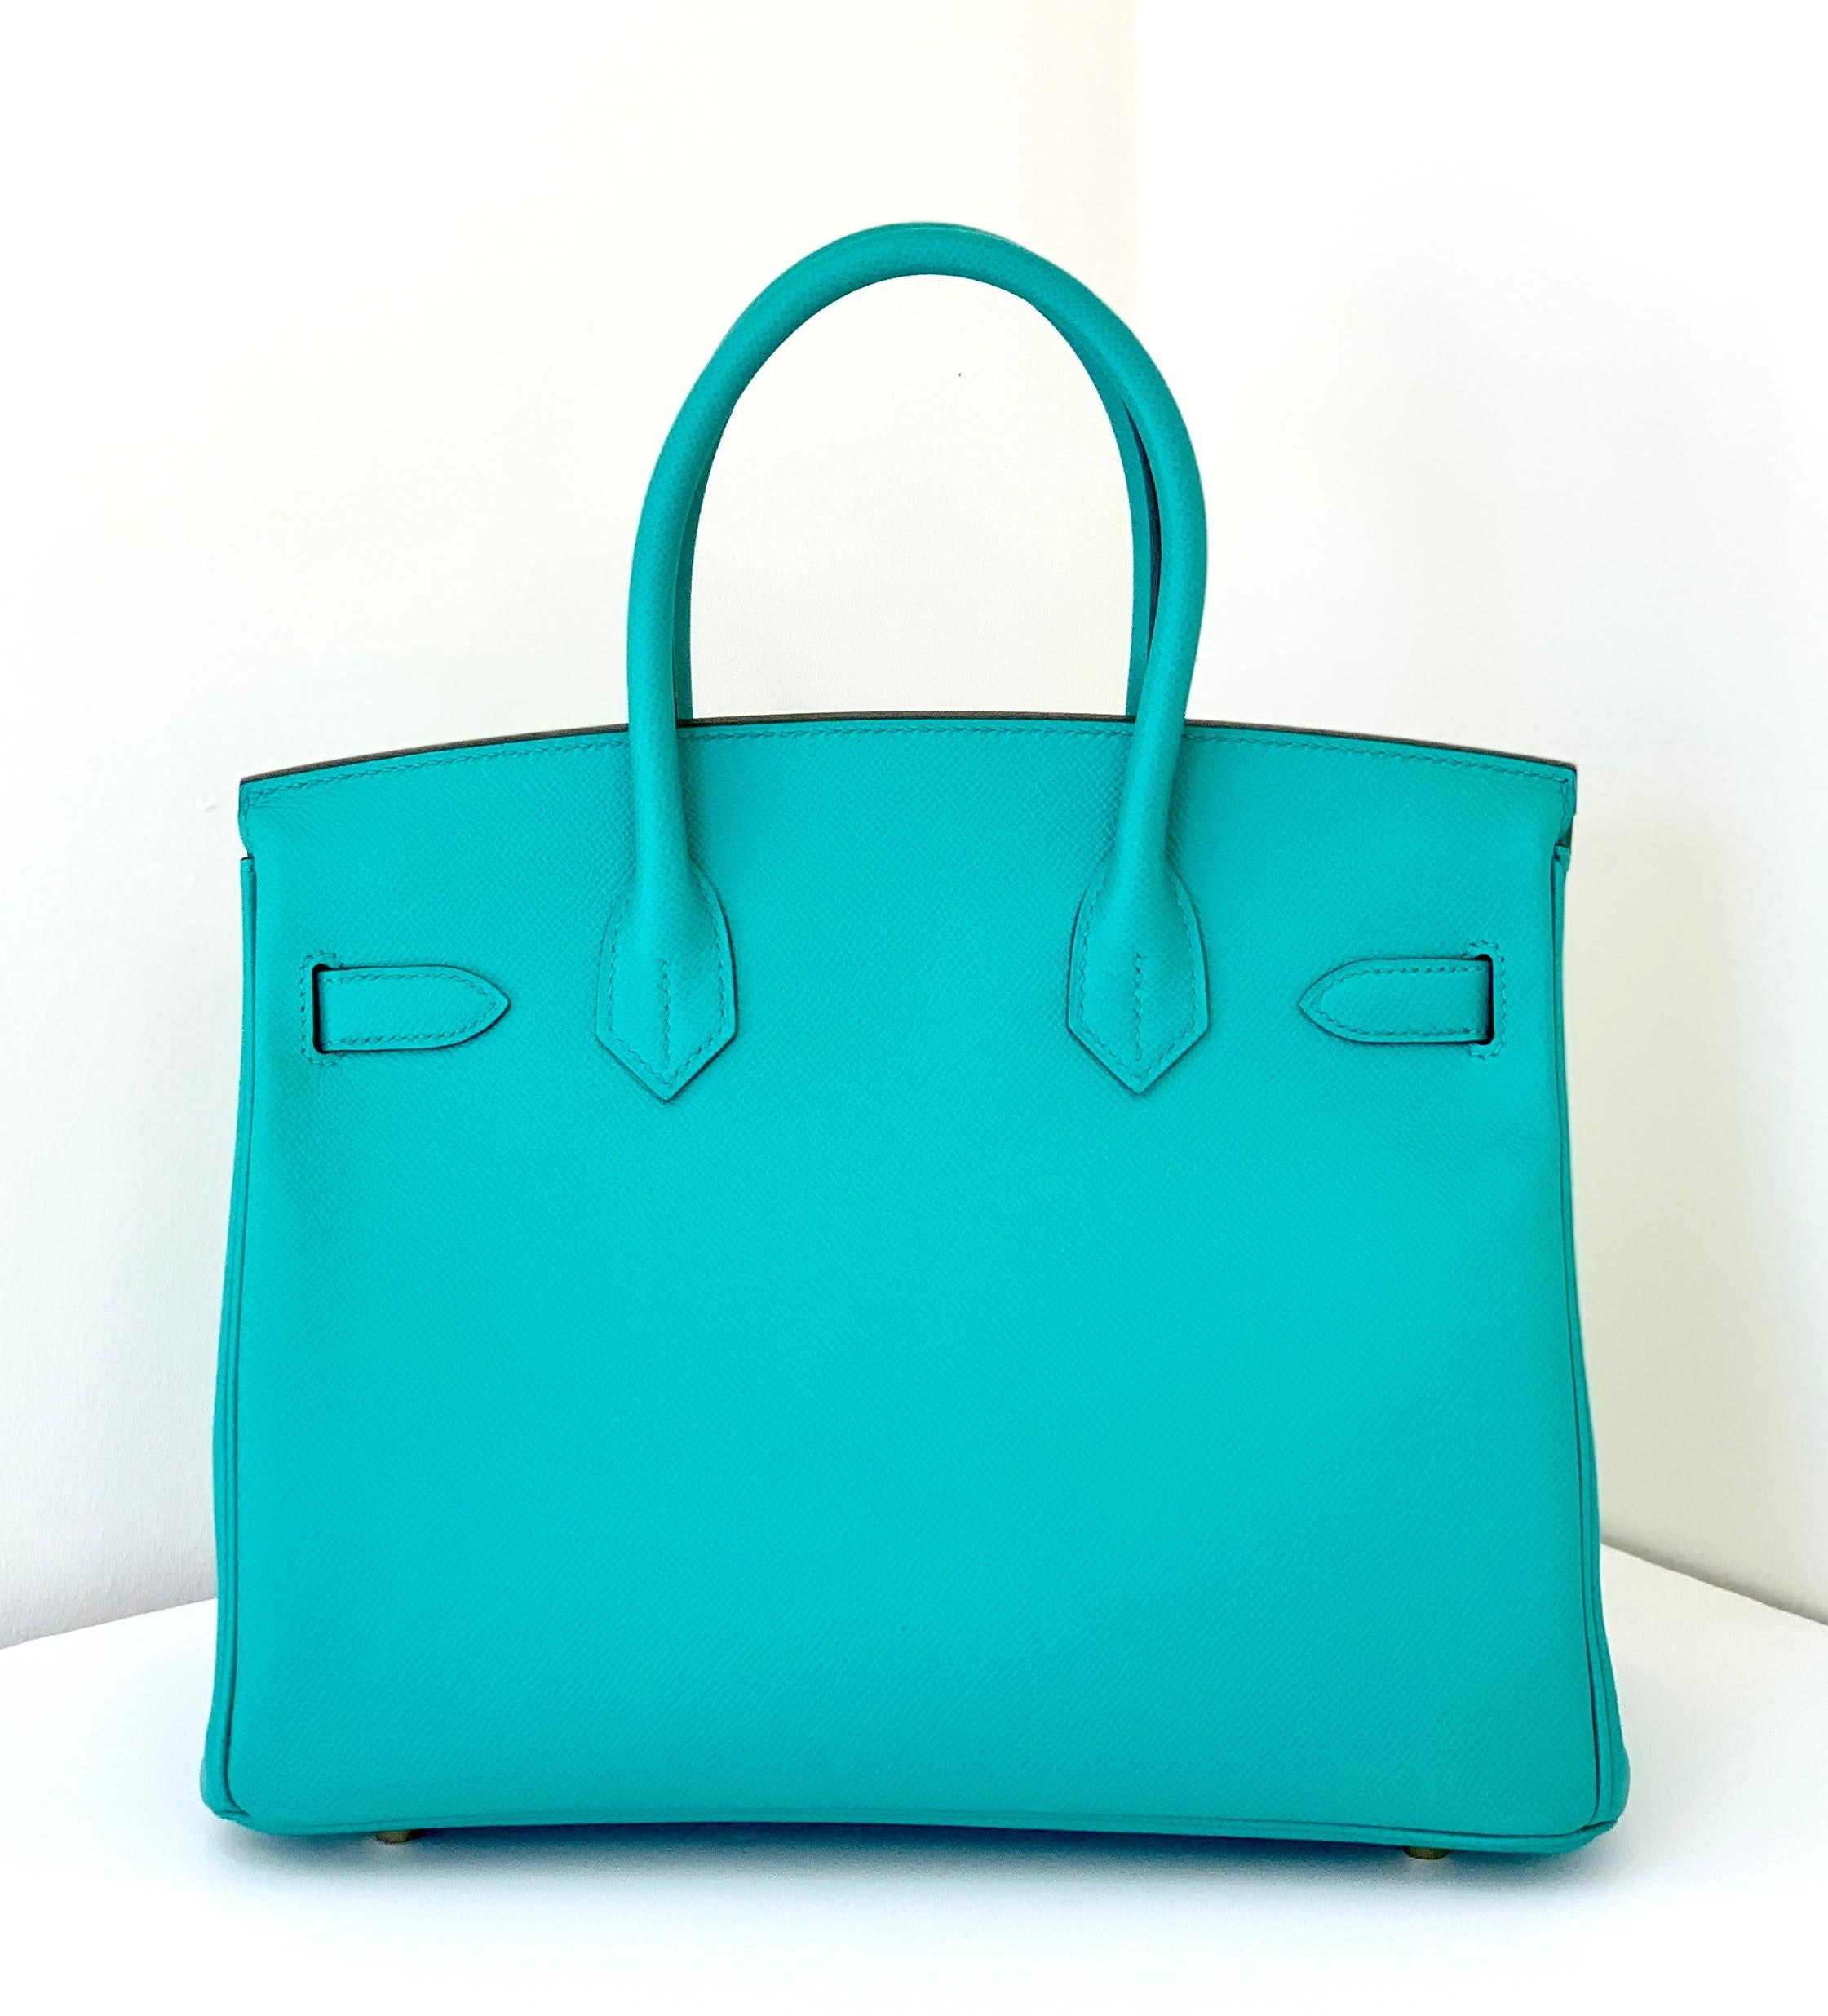 Hermes Birkin 30cm 
Brand new color just released!
Epsom Leather
Gold Hardware
The color is very similar to Lagoon
If you like epsom, this is the bag for you, as in this color it is very rare to find it in epsom
Waitlists are closed, why wait when